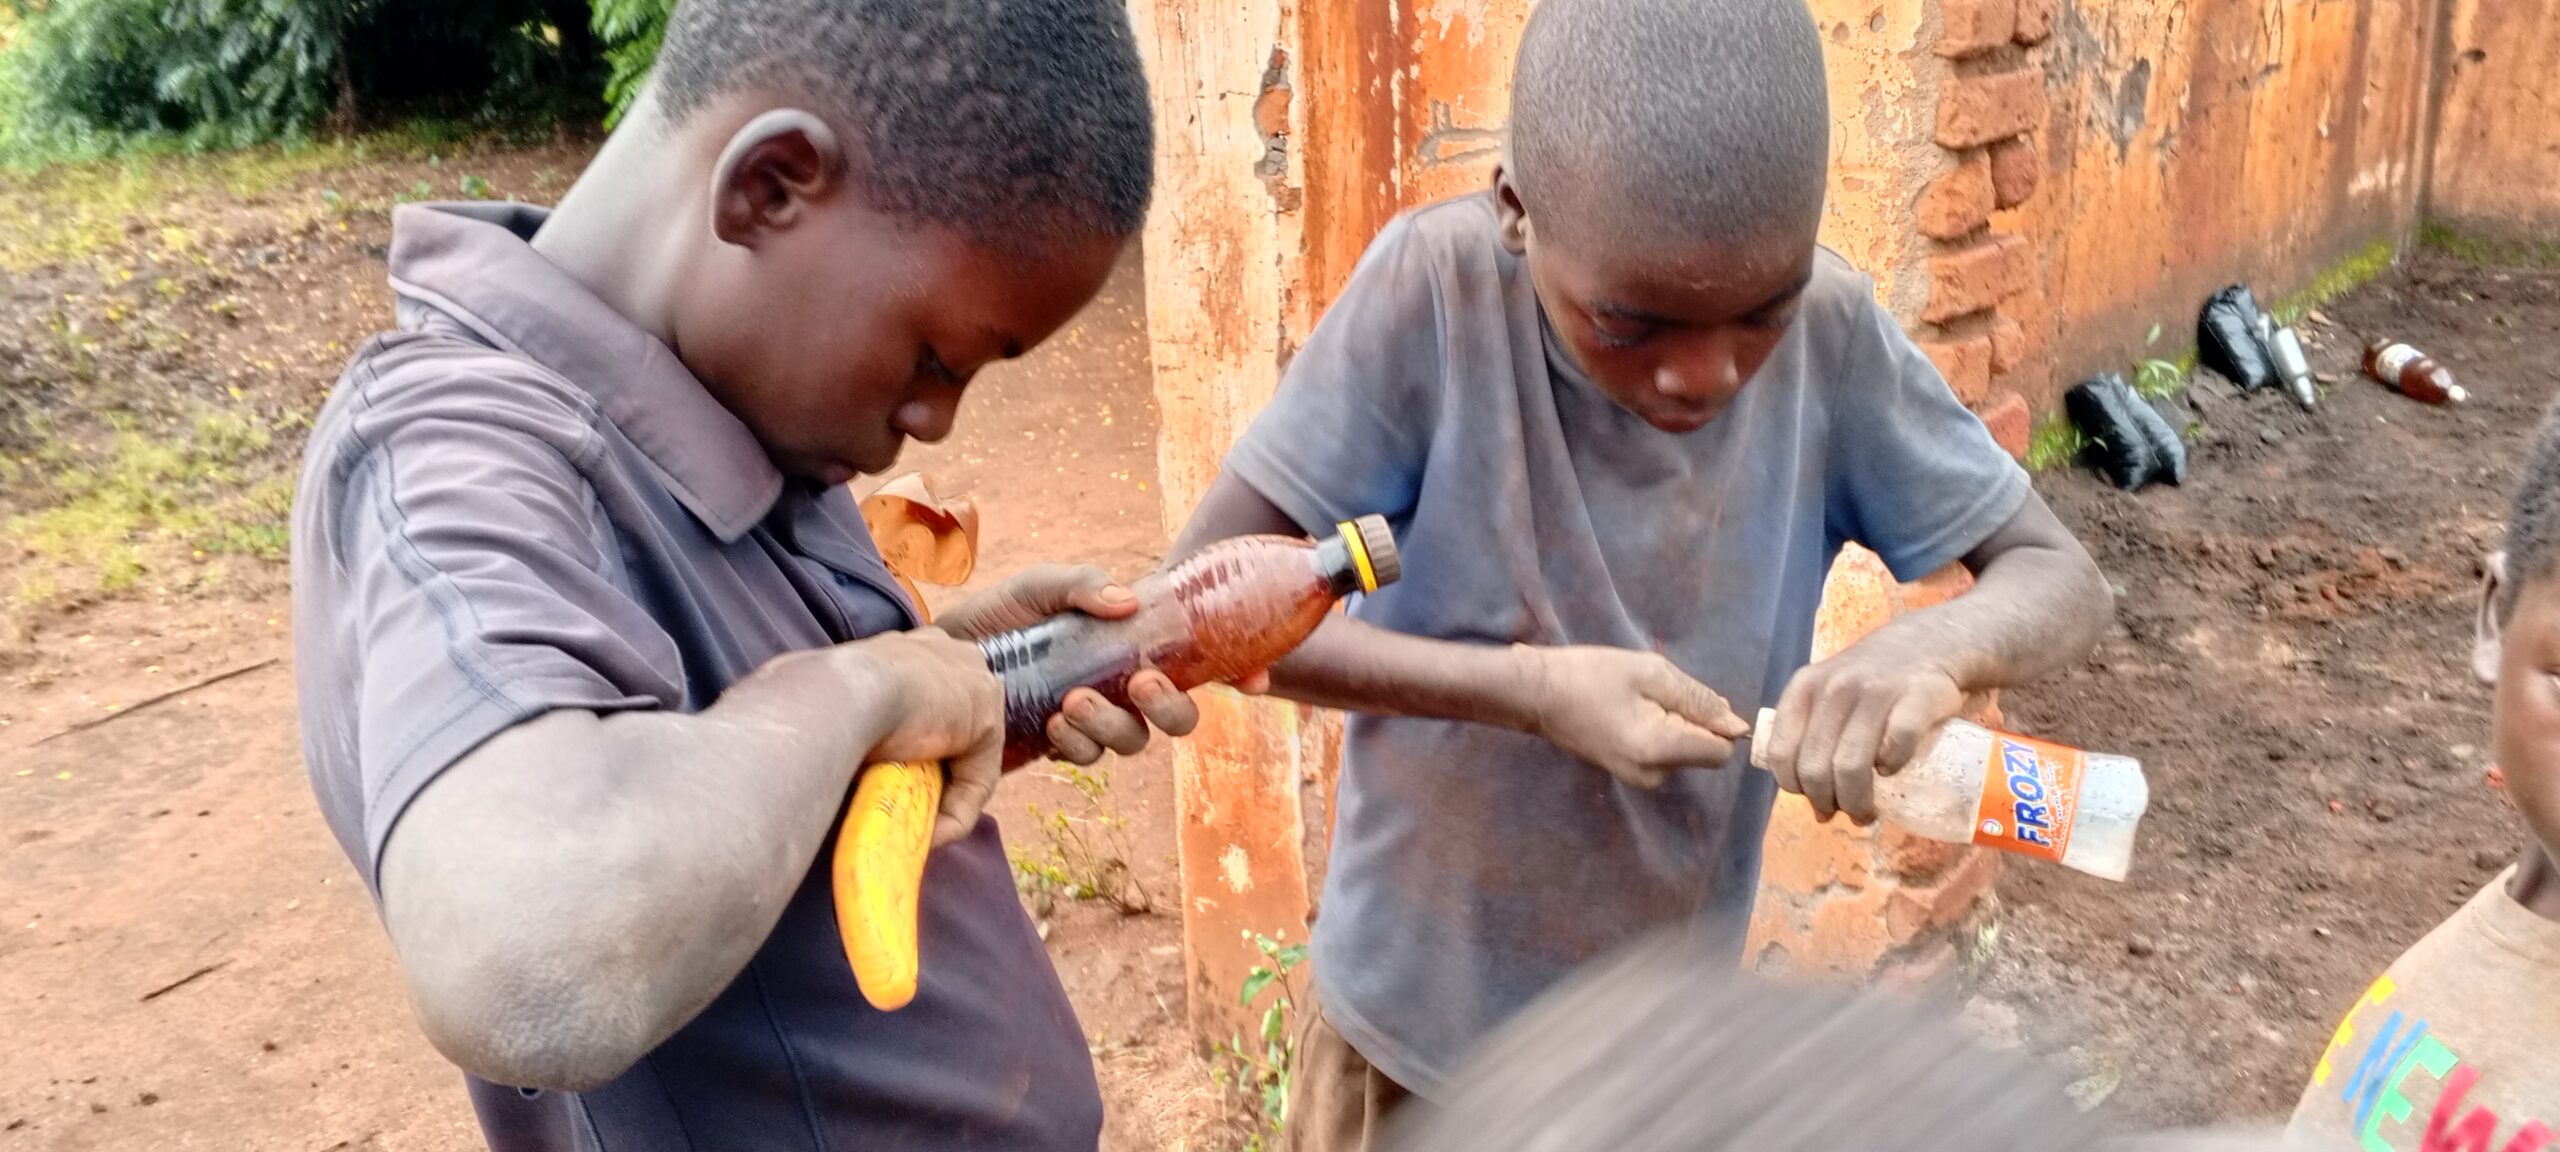 Creating Drip Irrigation with the Plastic Bottles